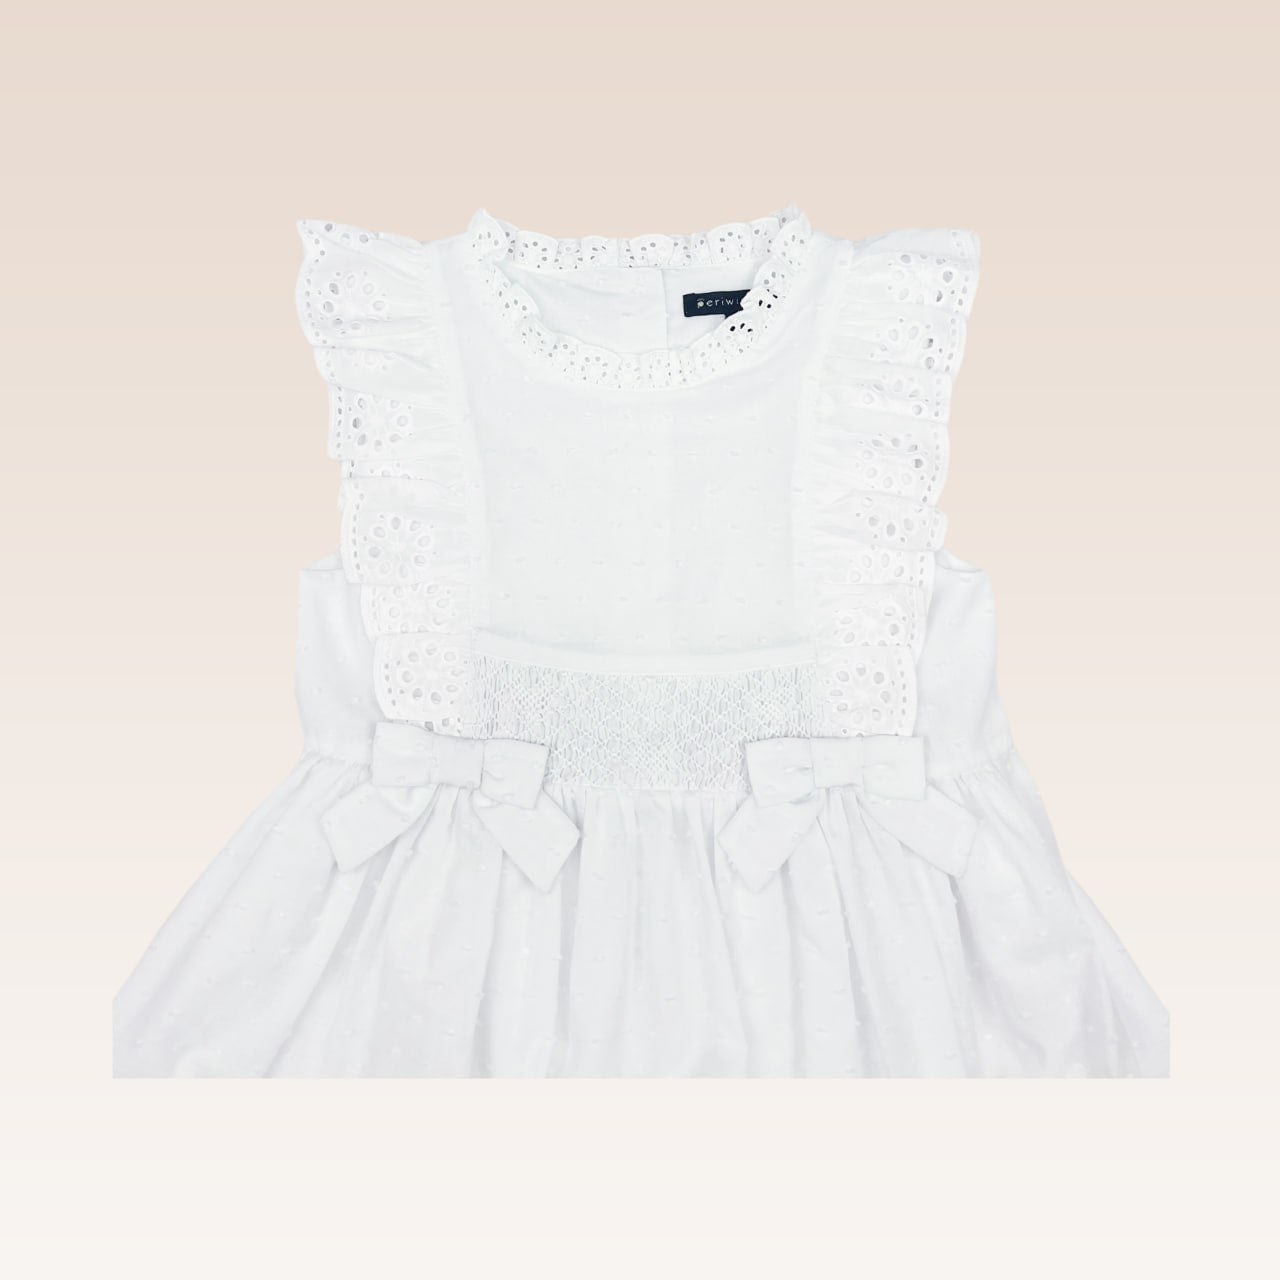 Felice White Dress with Smocked Waist and Trim Details